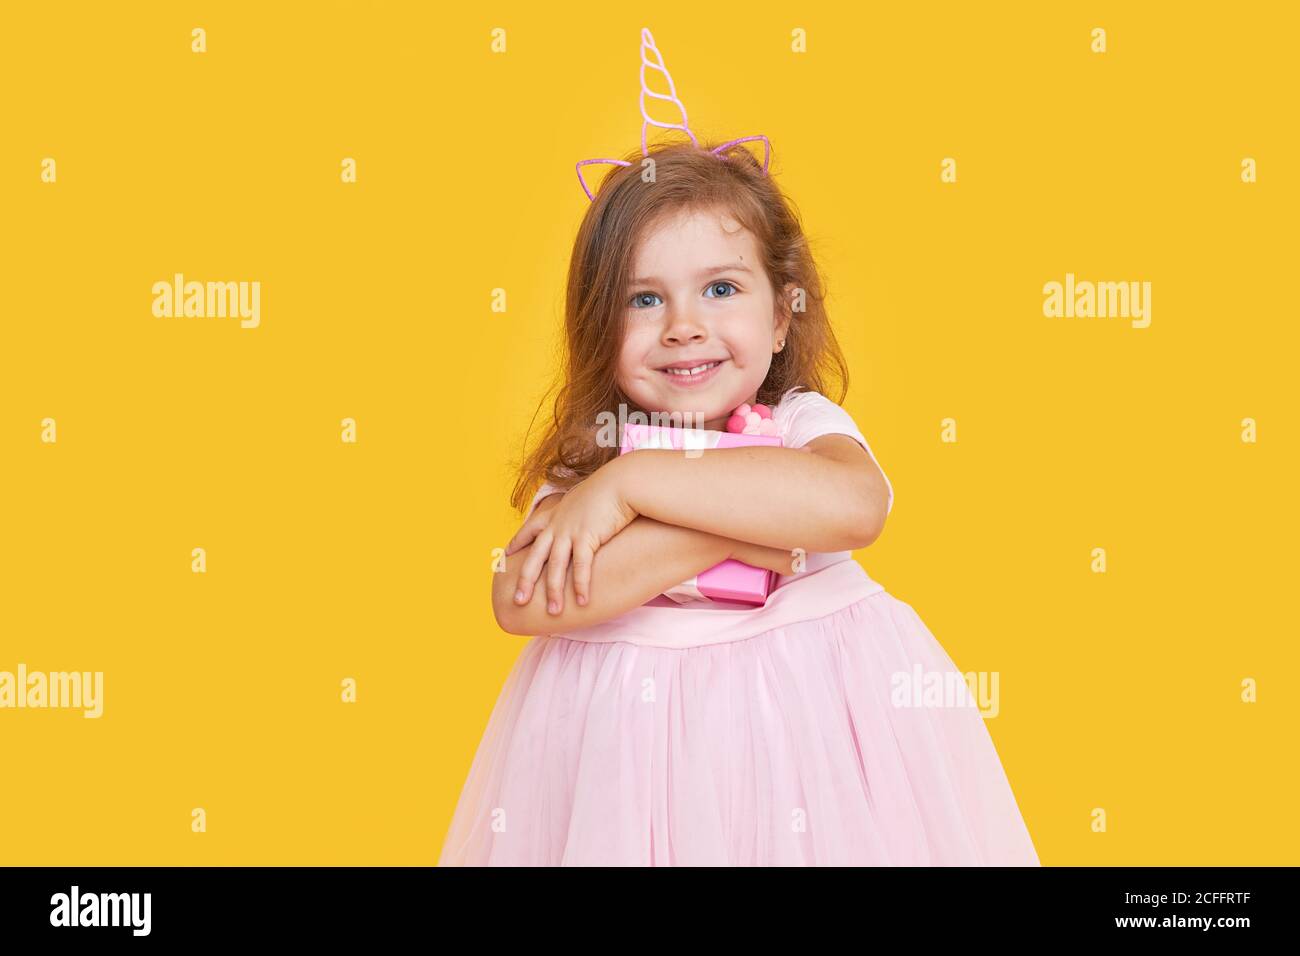 Cute child girl model with wavy hair in elegant pink dress posing on a yellow isolated background. Concept for advertising baby products and holidays Stock Photo